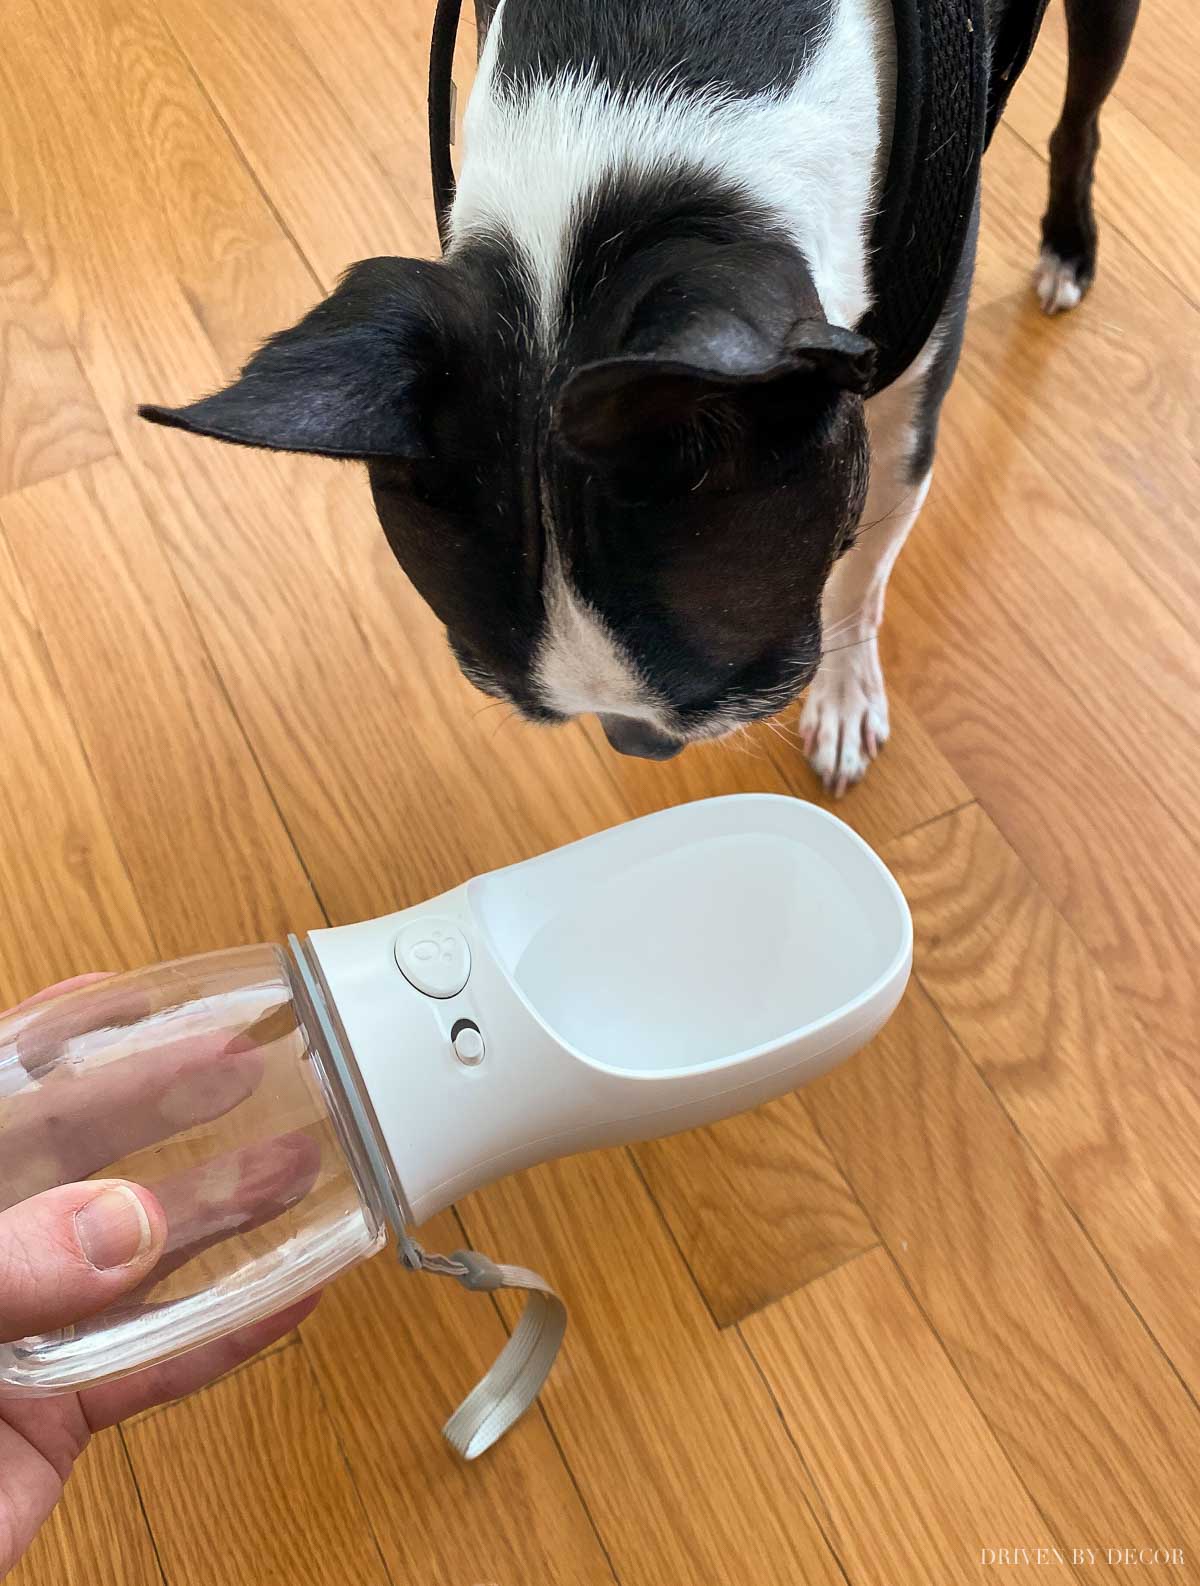 This dog water bottle is awesome for travel and for walks too! One of my favorite Amazon gadgets!